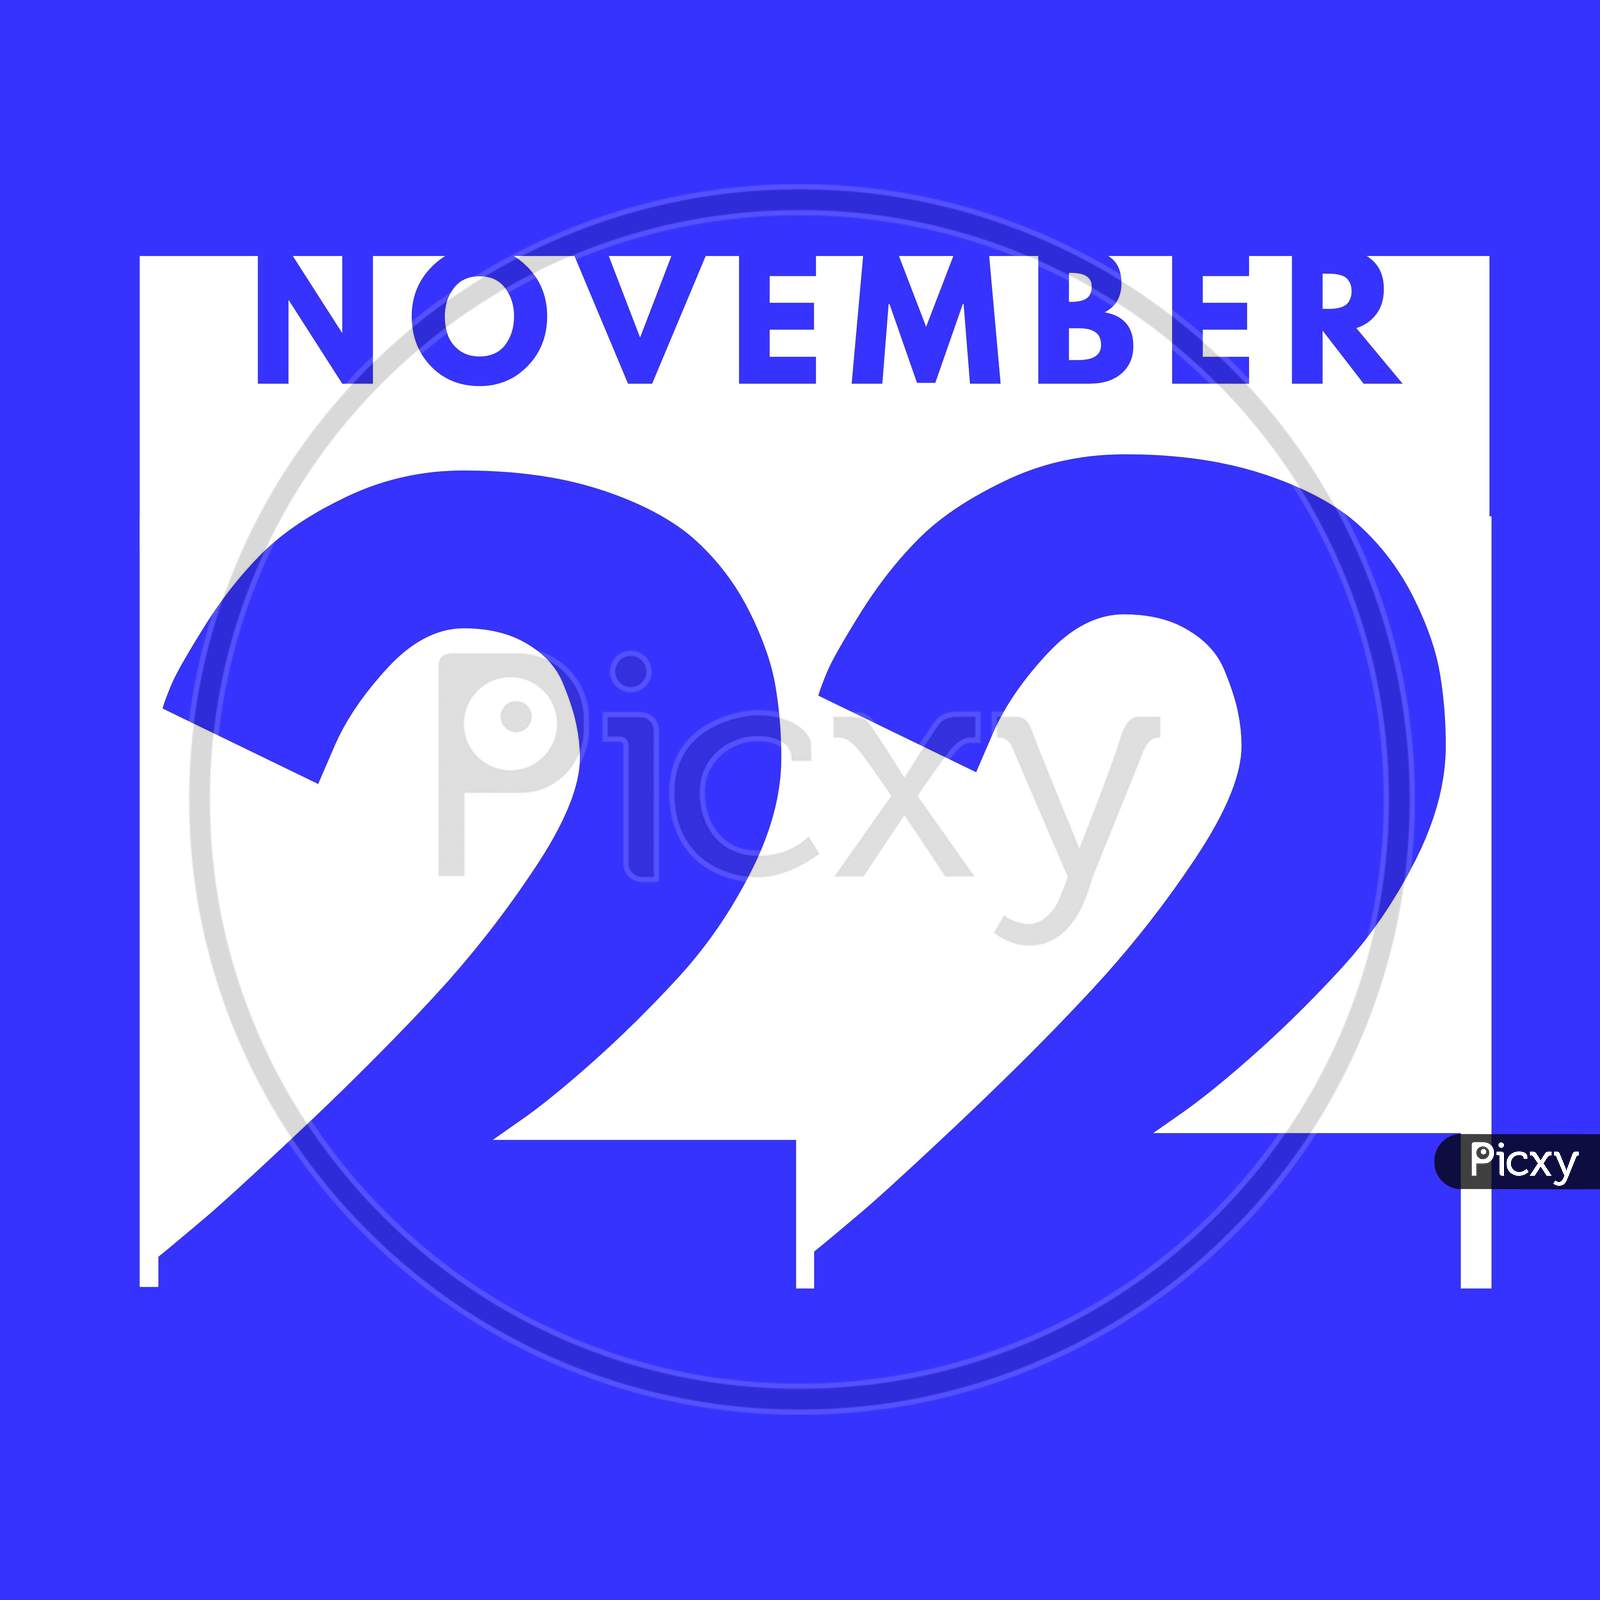 November 22 . Flat Modern Daily Calendar Icon .Date ,Day, Month .Calendar For The Month Of November